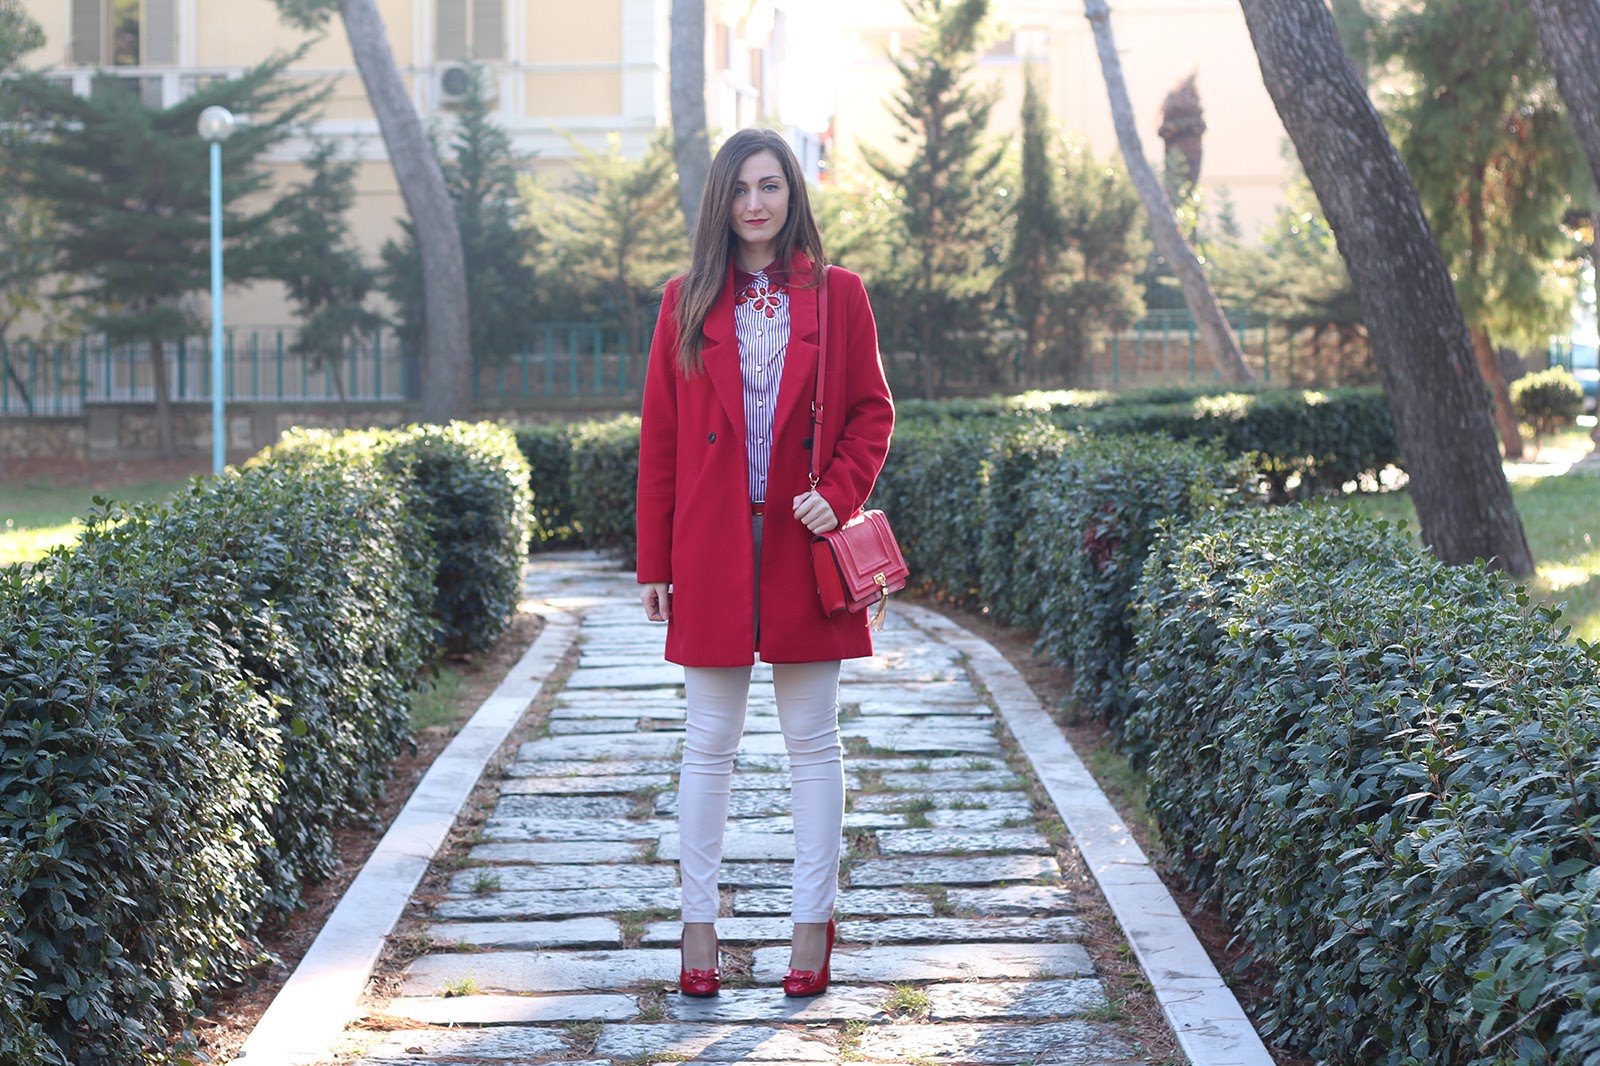 fashion blogger italian italy pescara girl style outfit red coat stripes choices sumissura camicia shirt pumps bow shoes heels janestone necklace jewerly bijoux new book bag